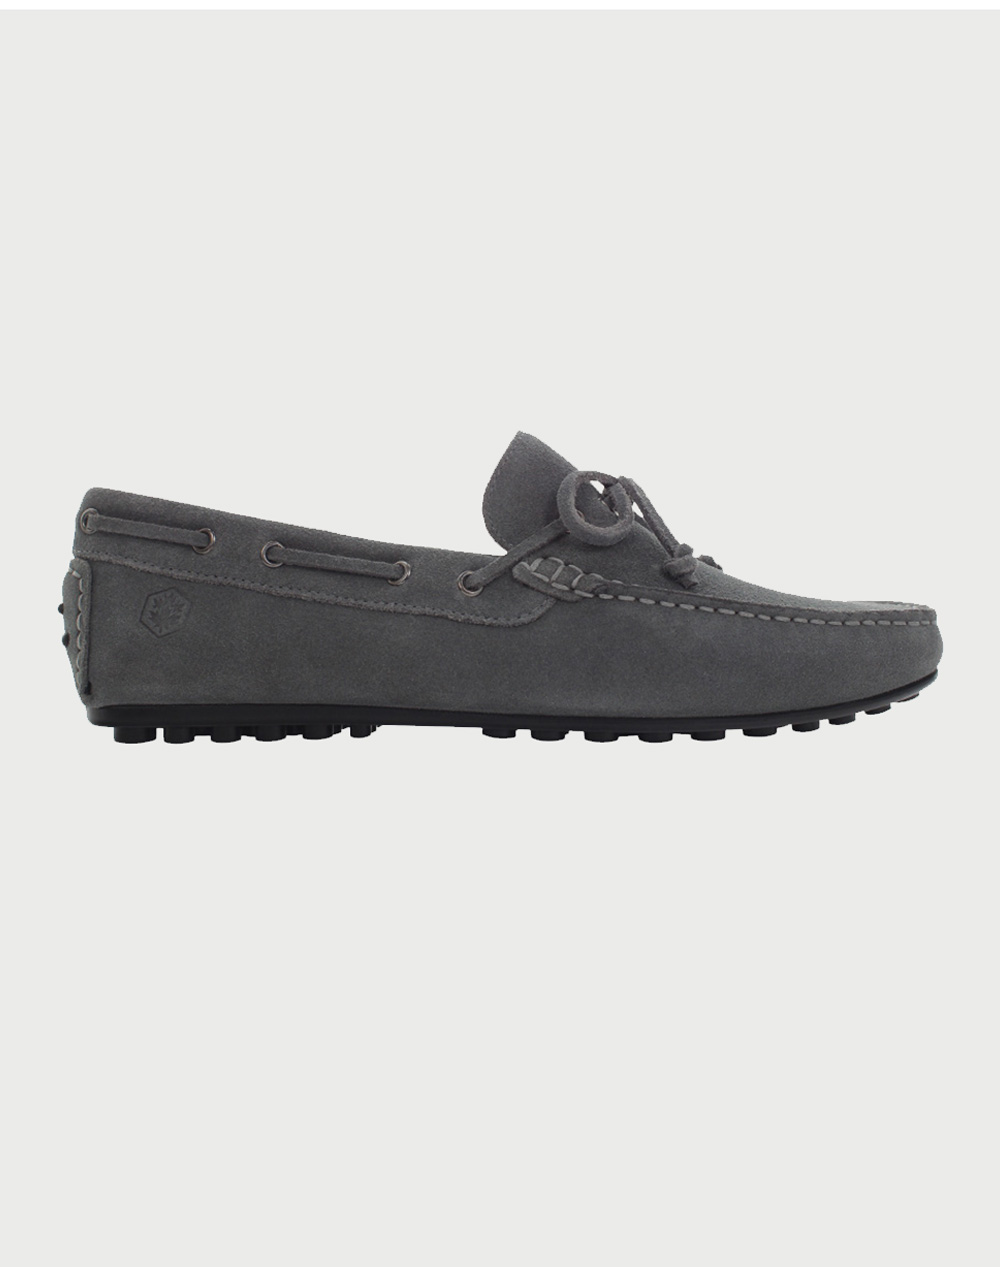 LUMBERJACK MAIN DRIVE MOCASSIN LACE UP SUEDE ΠΑΠΟΥΤΣΙ ΑΝΔΡΙΚΟ SM81802002A01-CD017 Gray